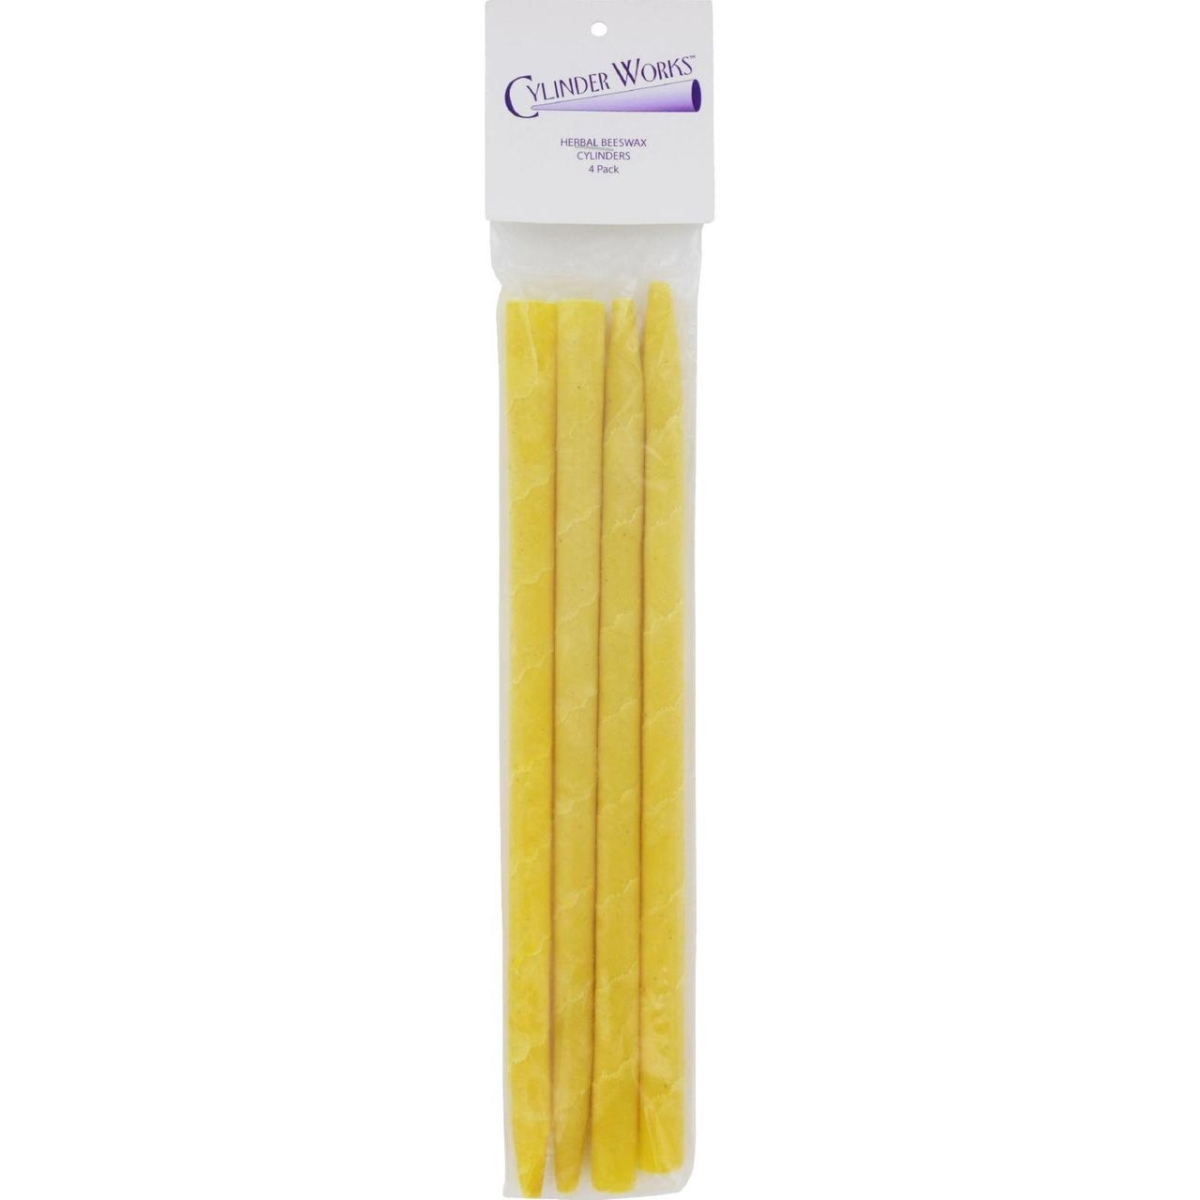 Hg0409870 Herbal Beeswax Ear Candles - Pack Of 4